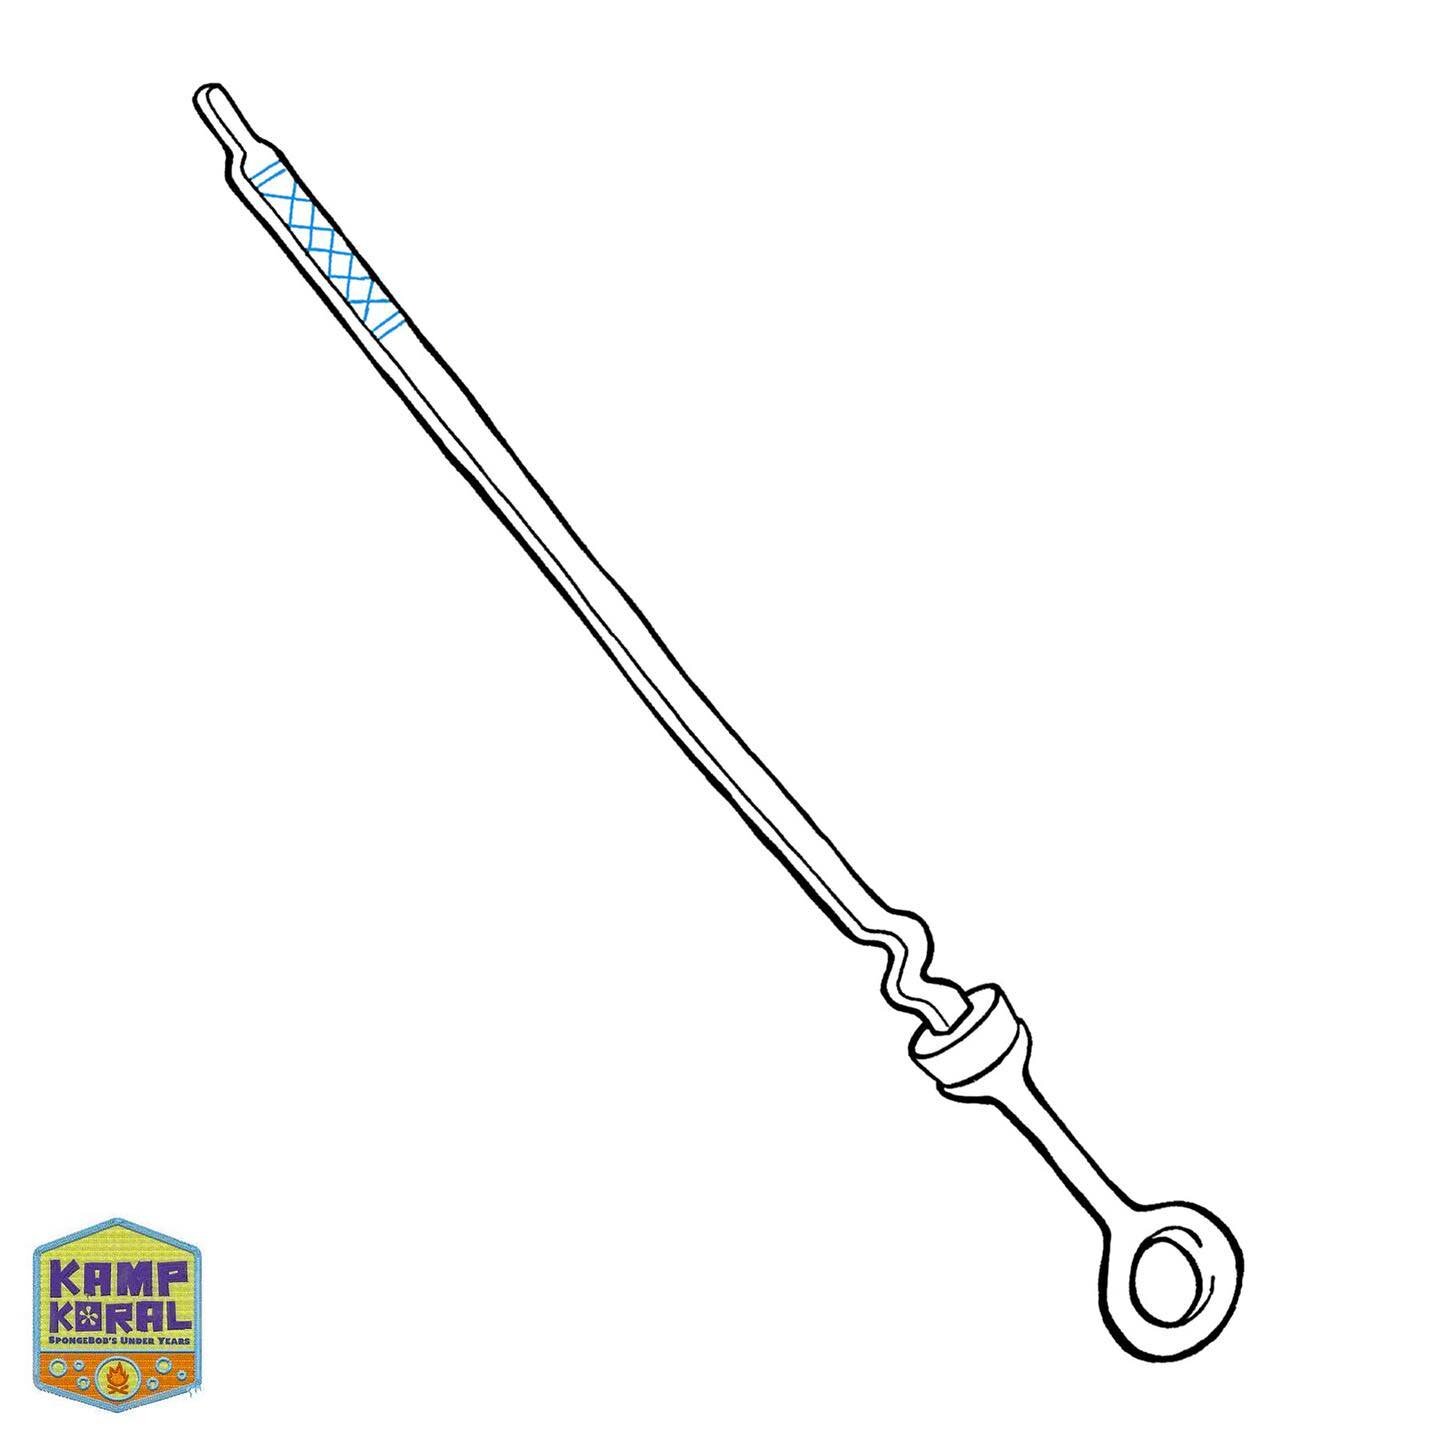 This dipstick was the first prop I was assigned to design for Kamp Koral. I had such a blast working on this show. It&rsquo;s been fun watching the finished episodes and seeing how the 3D artists translated, and in most cases, improved my designs. Ha